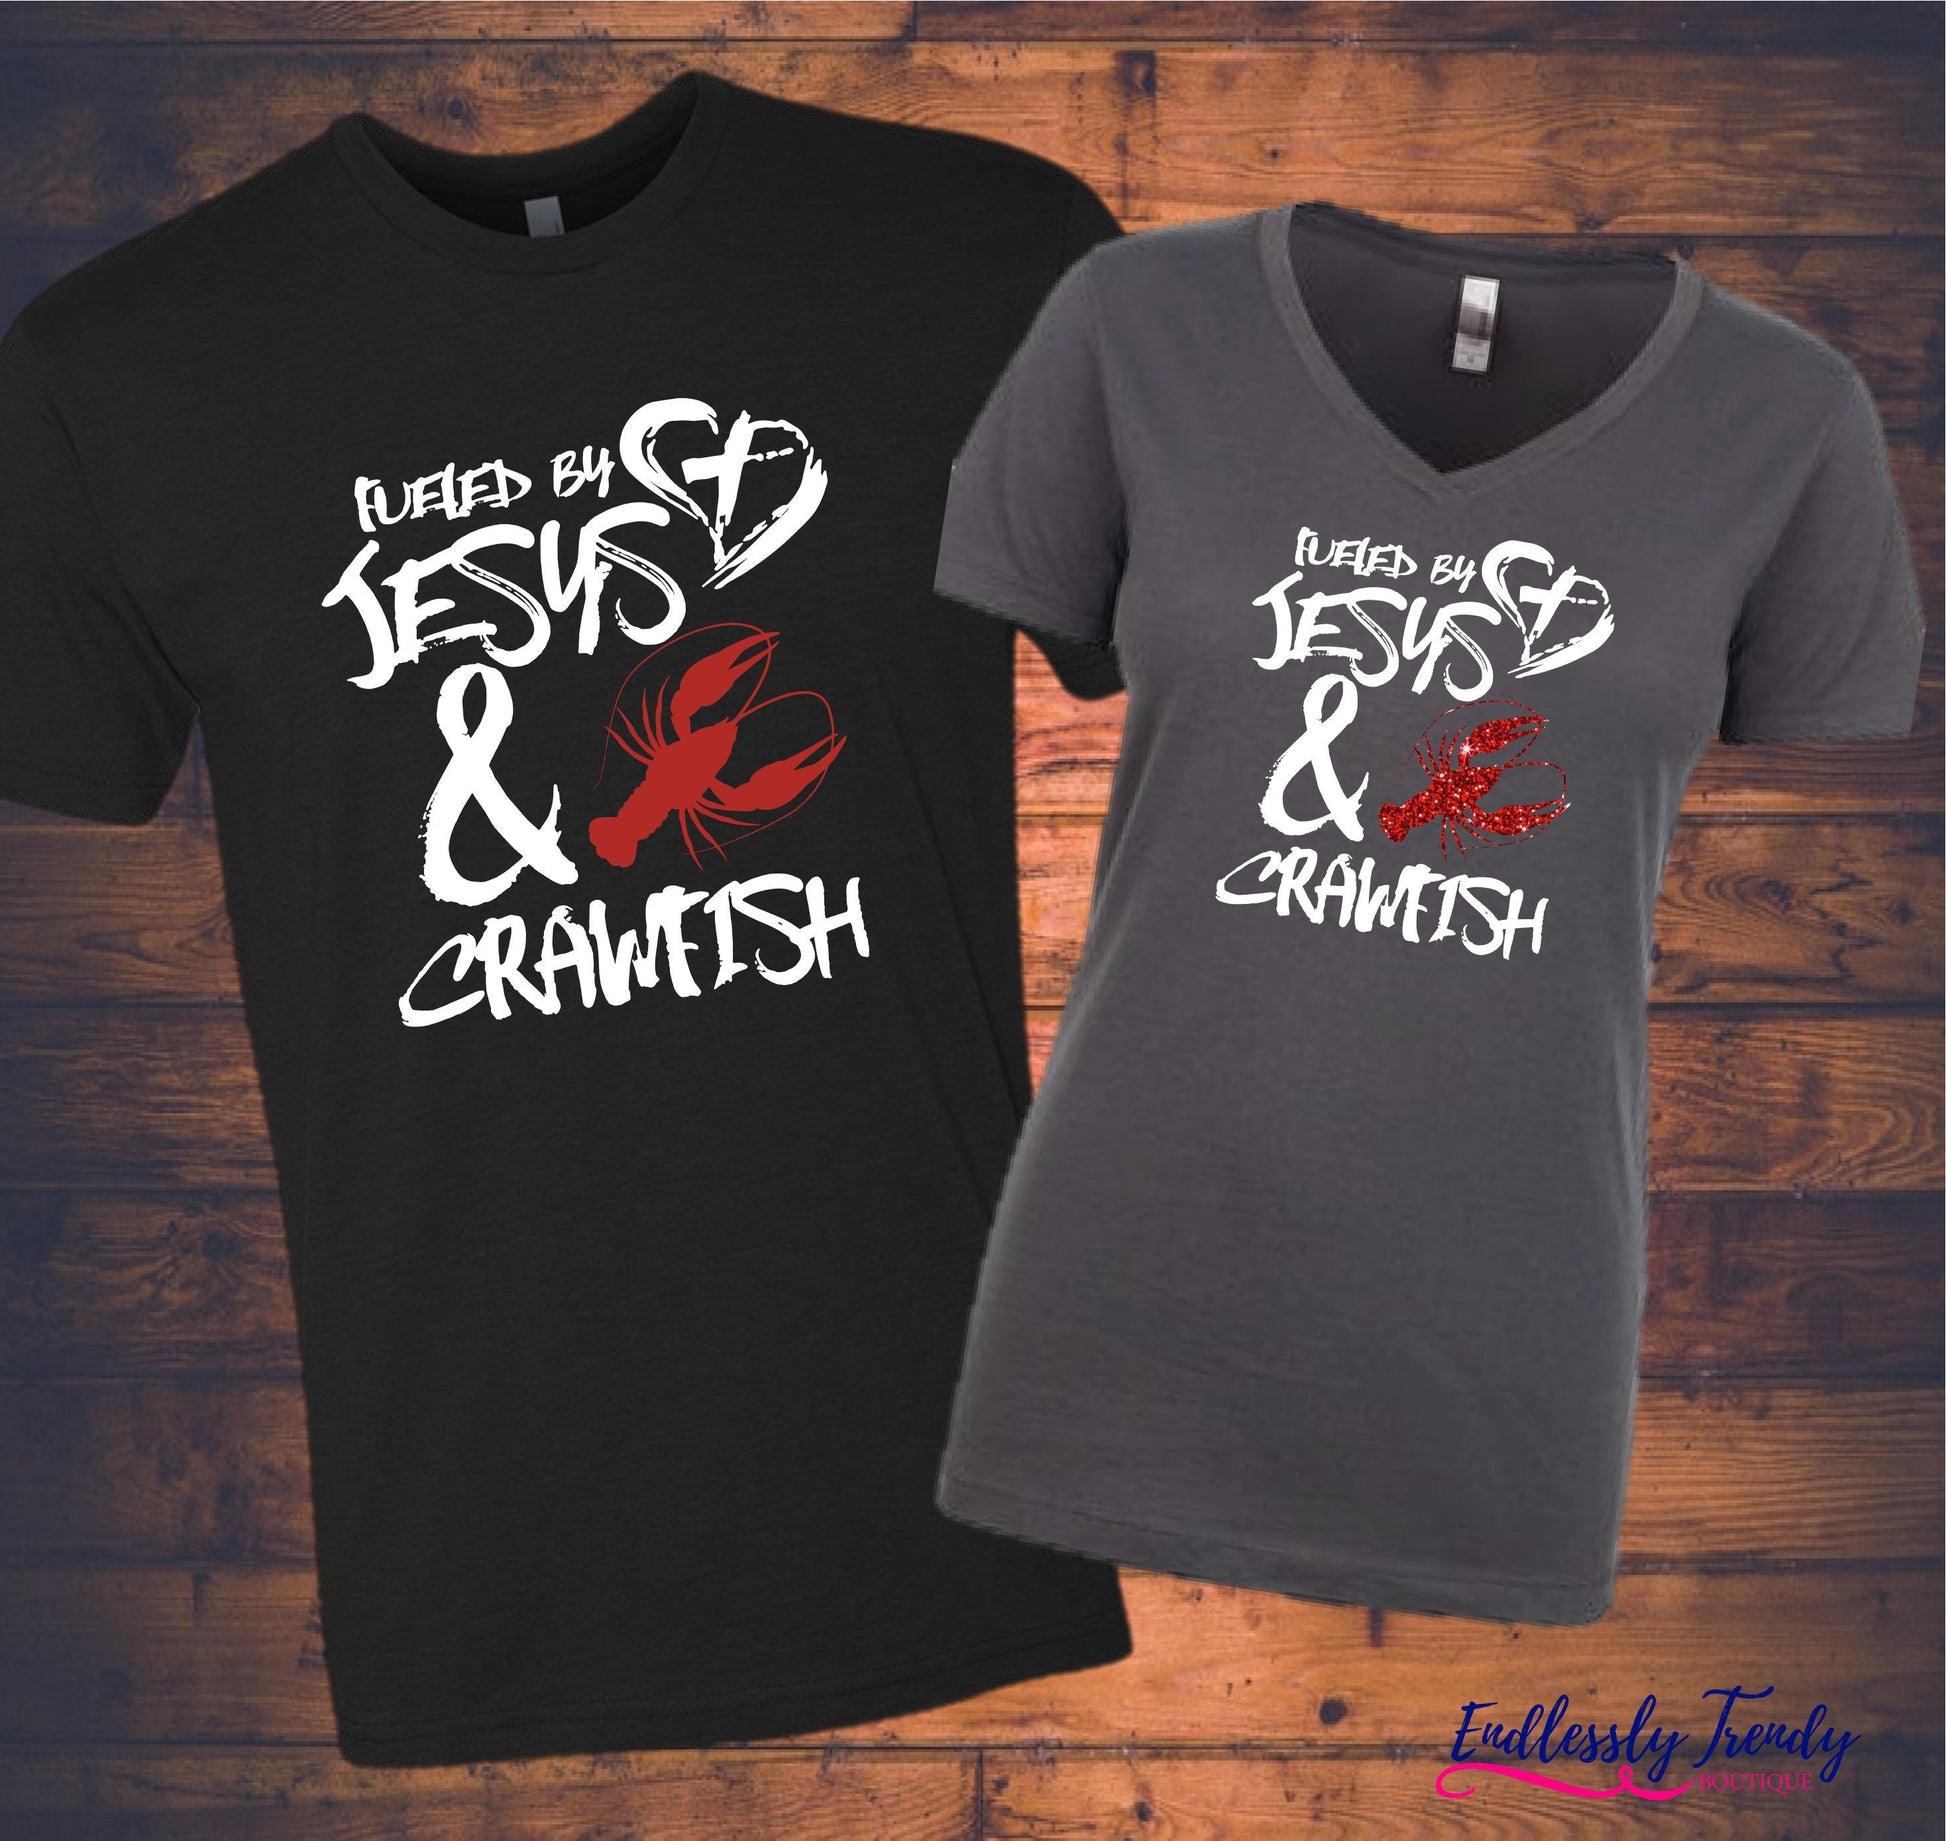 Fueled By Jesus & And Crawfish Christian Tee - - Endlessly Trendy Boutique